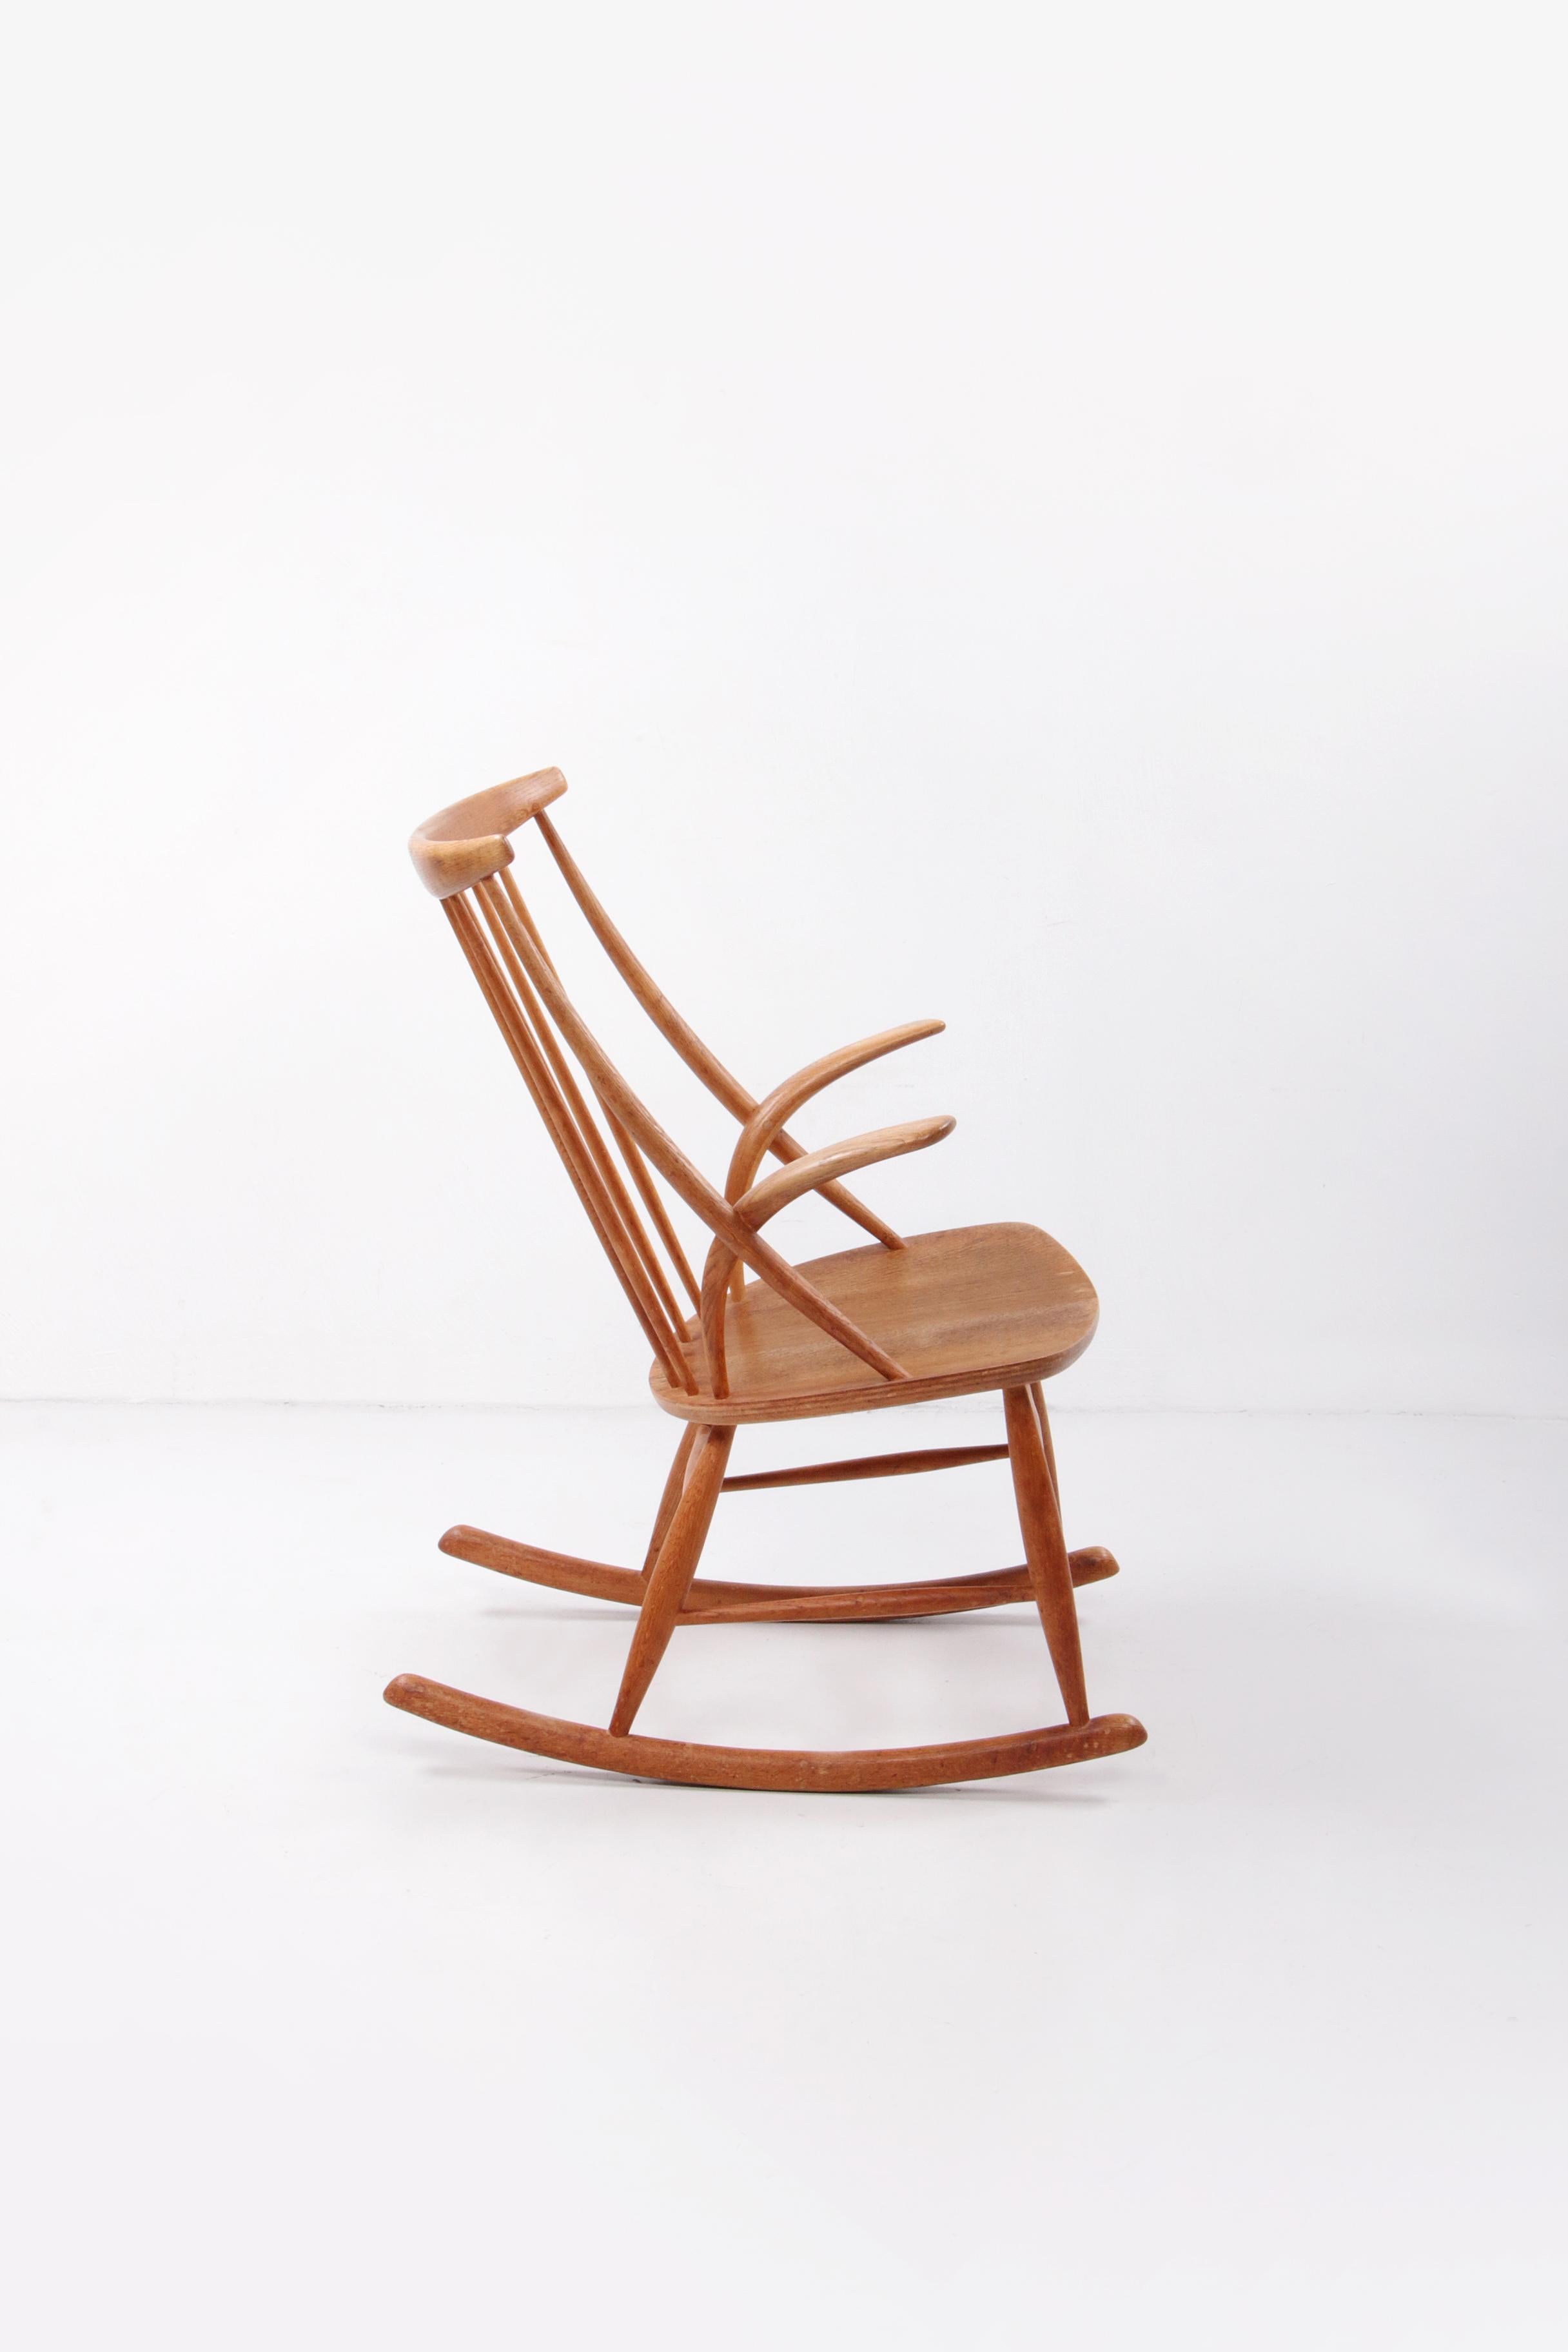 Mid-20th Century Illum Wikkelso and Niels Eilersen Rocking Chair 1958